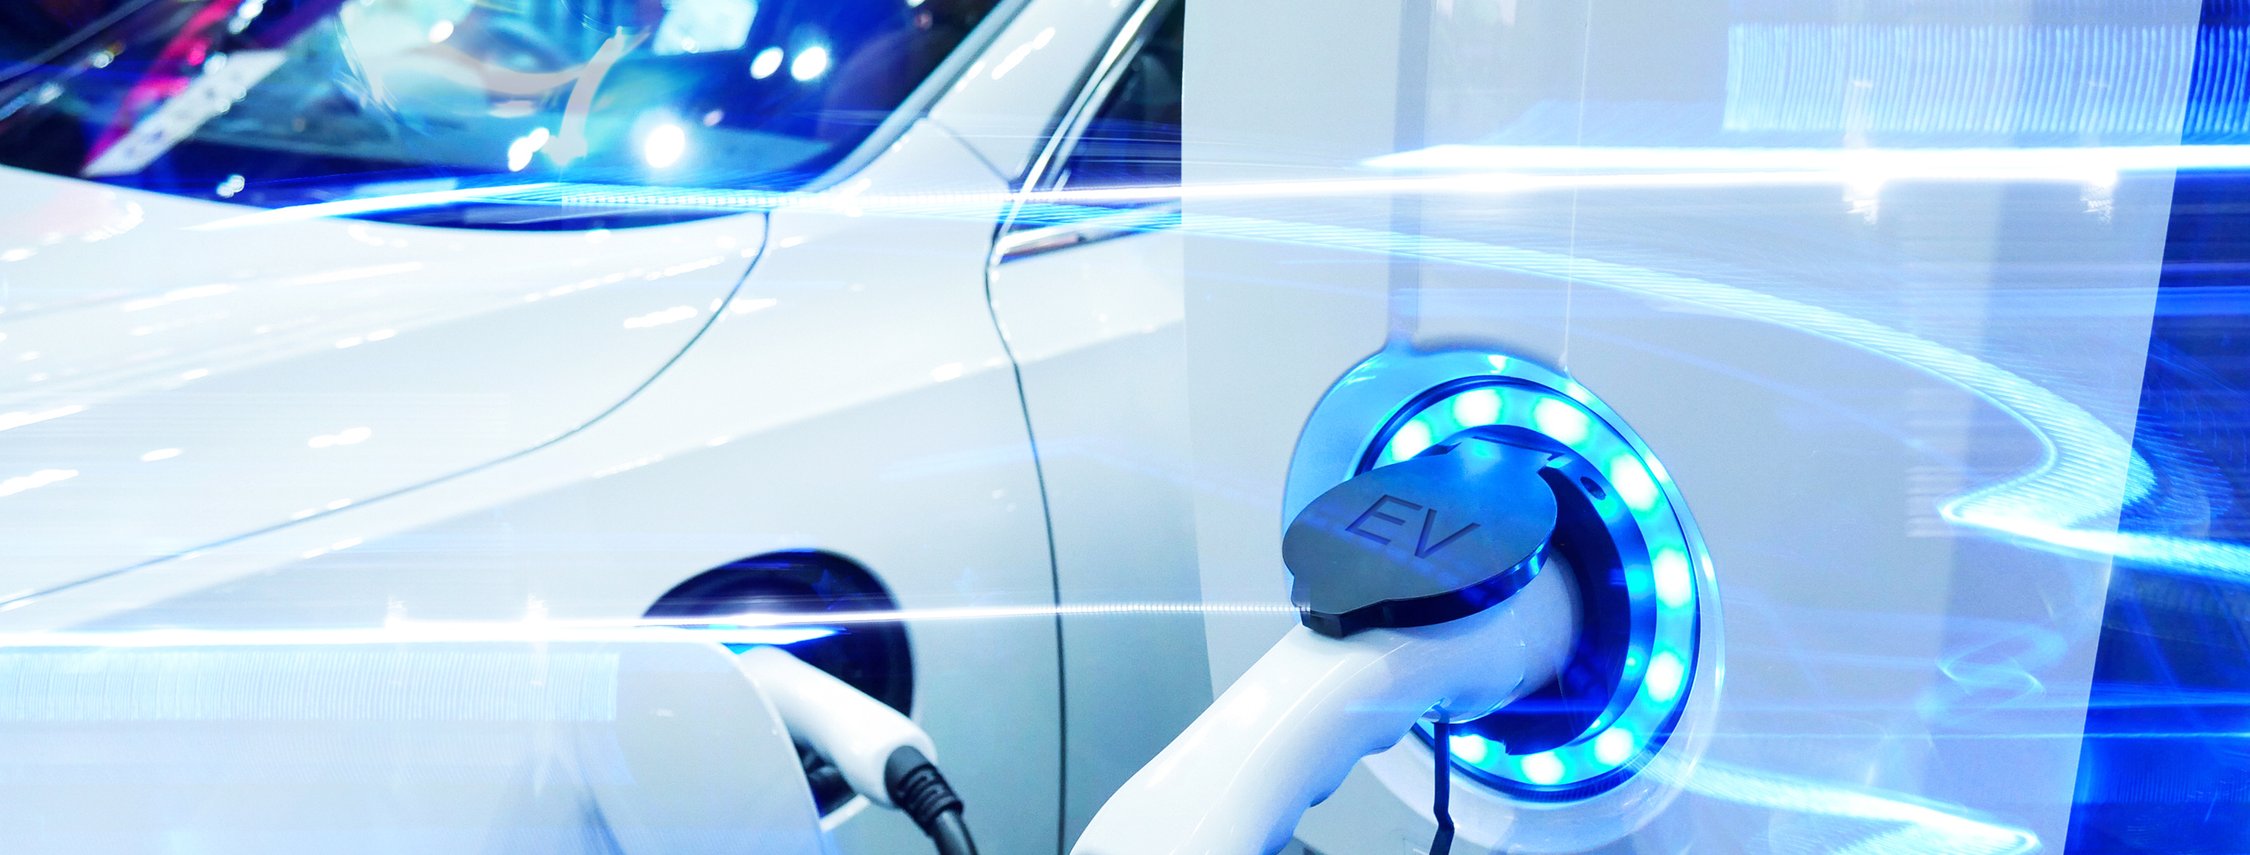 Electric Vehicles and the Developments in key Markets